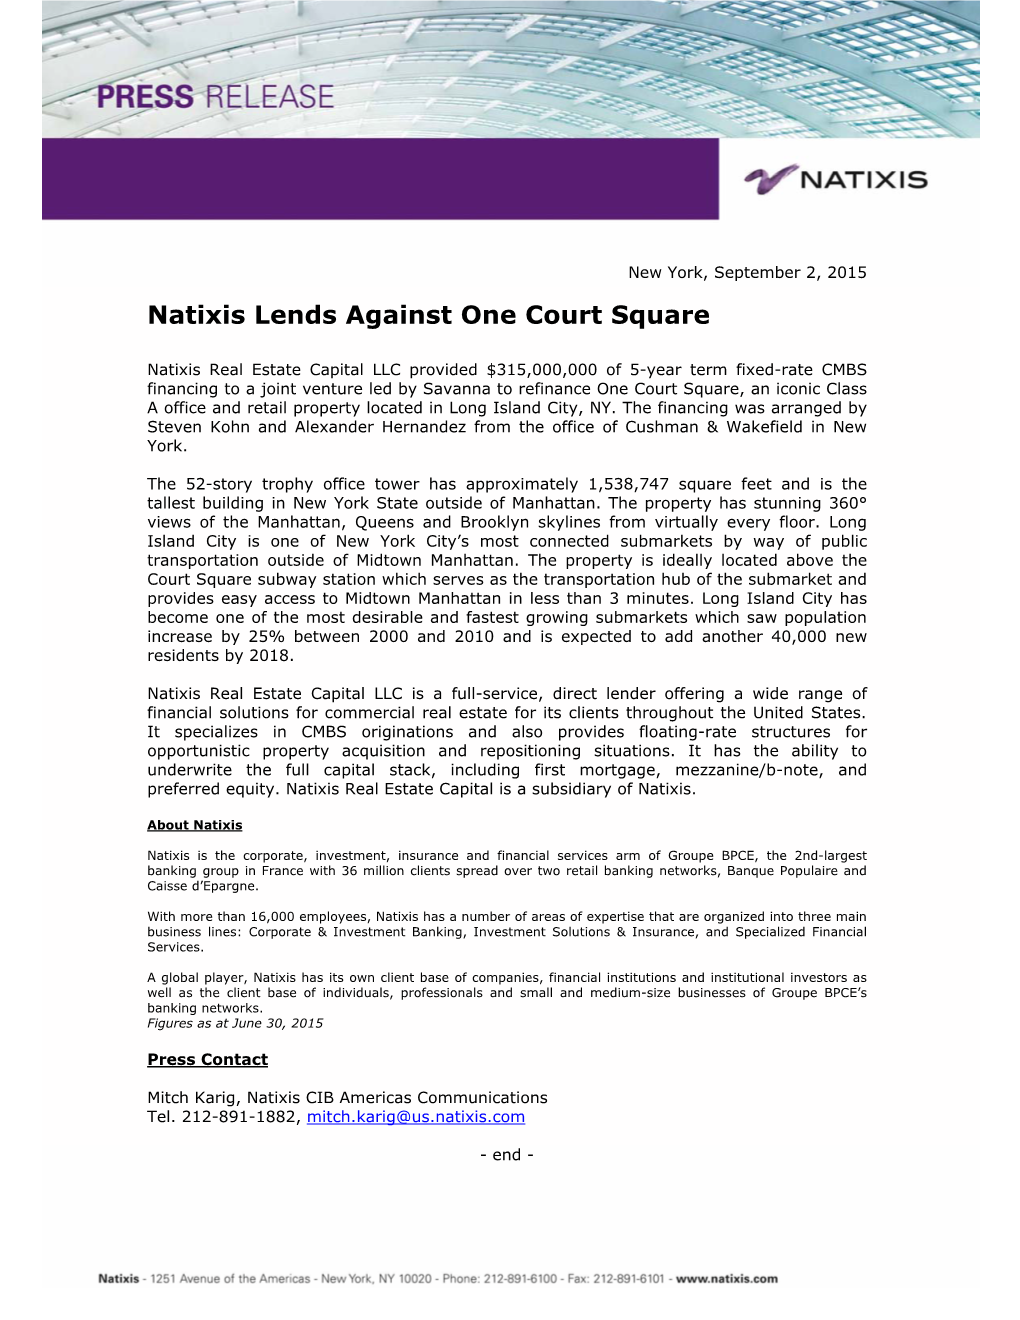 Natixis Lends Against One Court Square